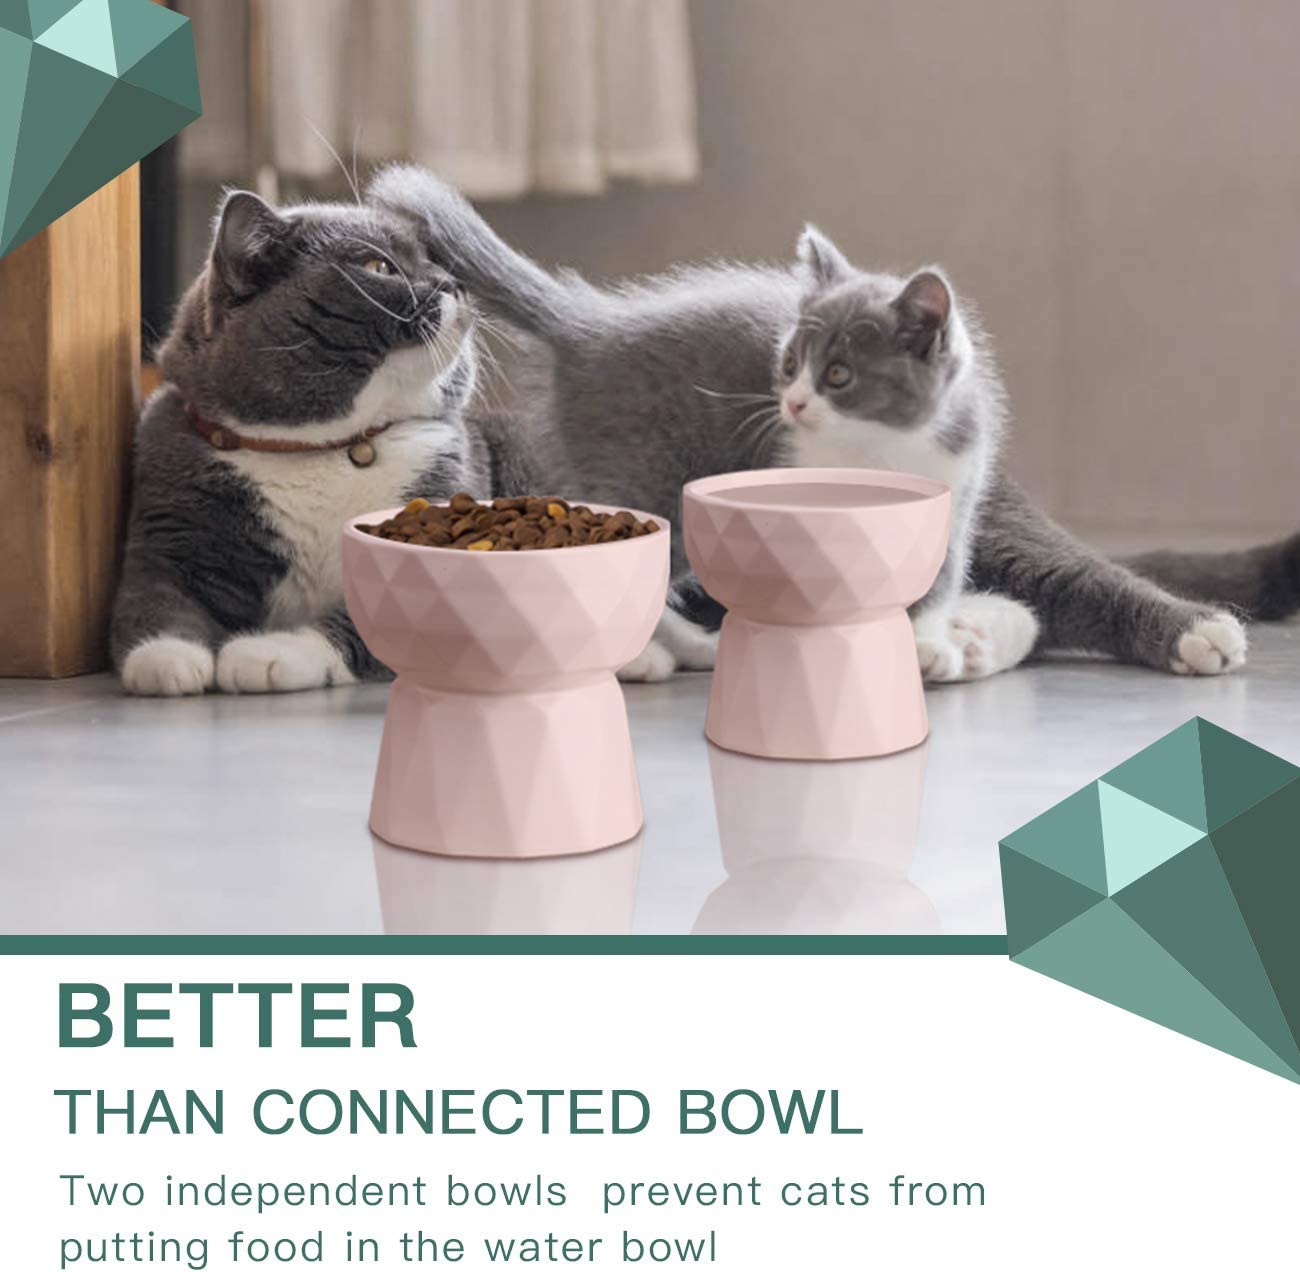 KUTKUT 2Pcs Ceramic Cat Food & Water Bowl, Raised Cat Feeder Dishes with Stand, Elevated Food Bowl for Cats and Small Dogs, Stress Free Backflow Prevention, Anti Vomiting & Reduce Neck Burden